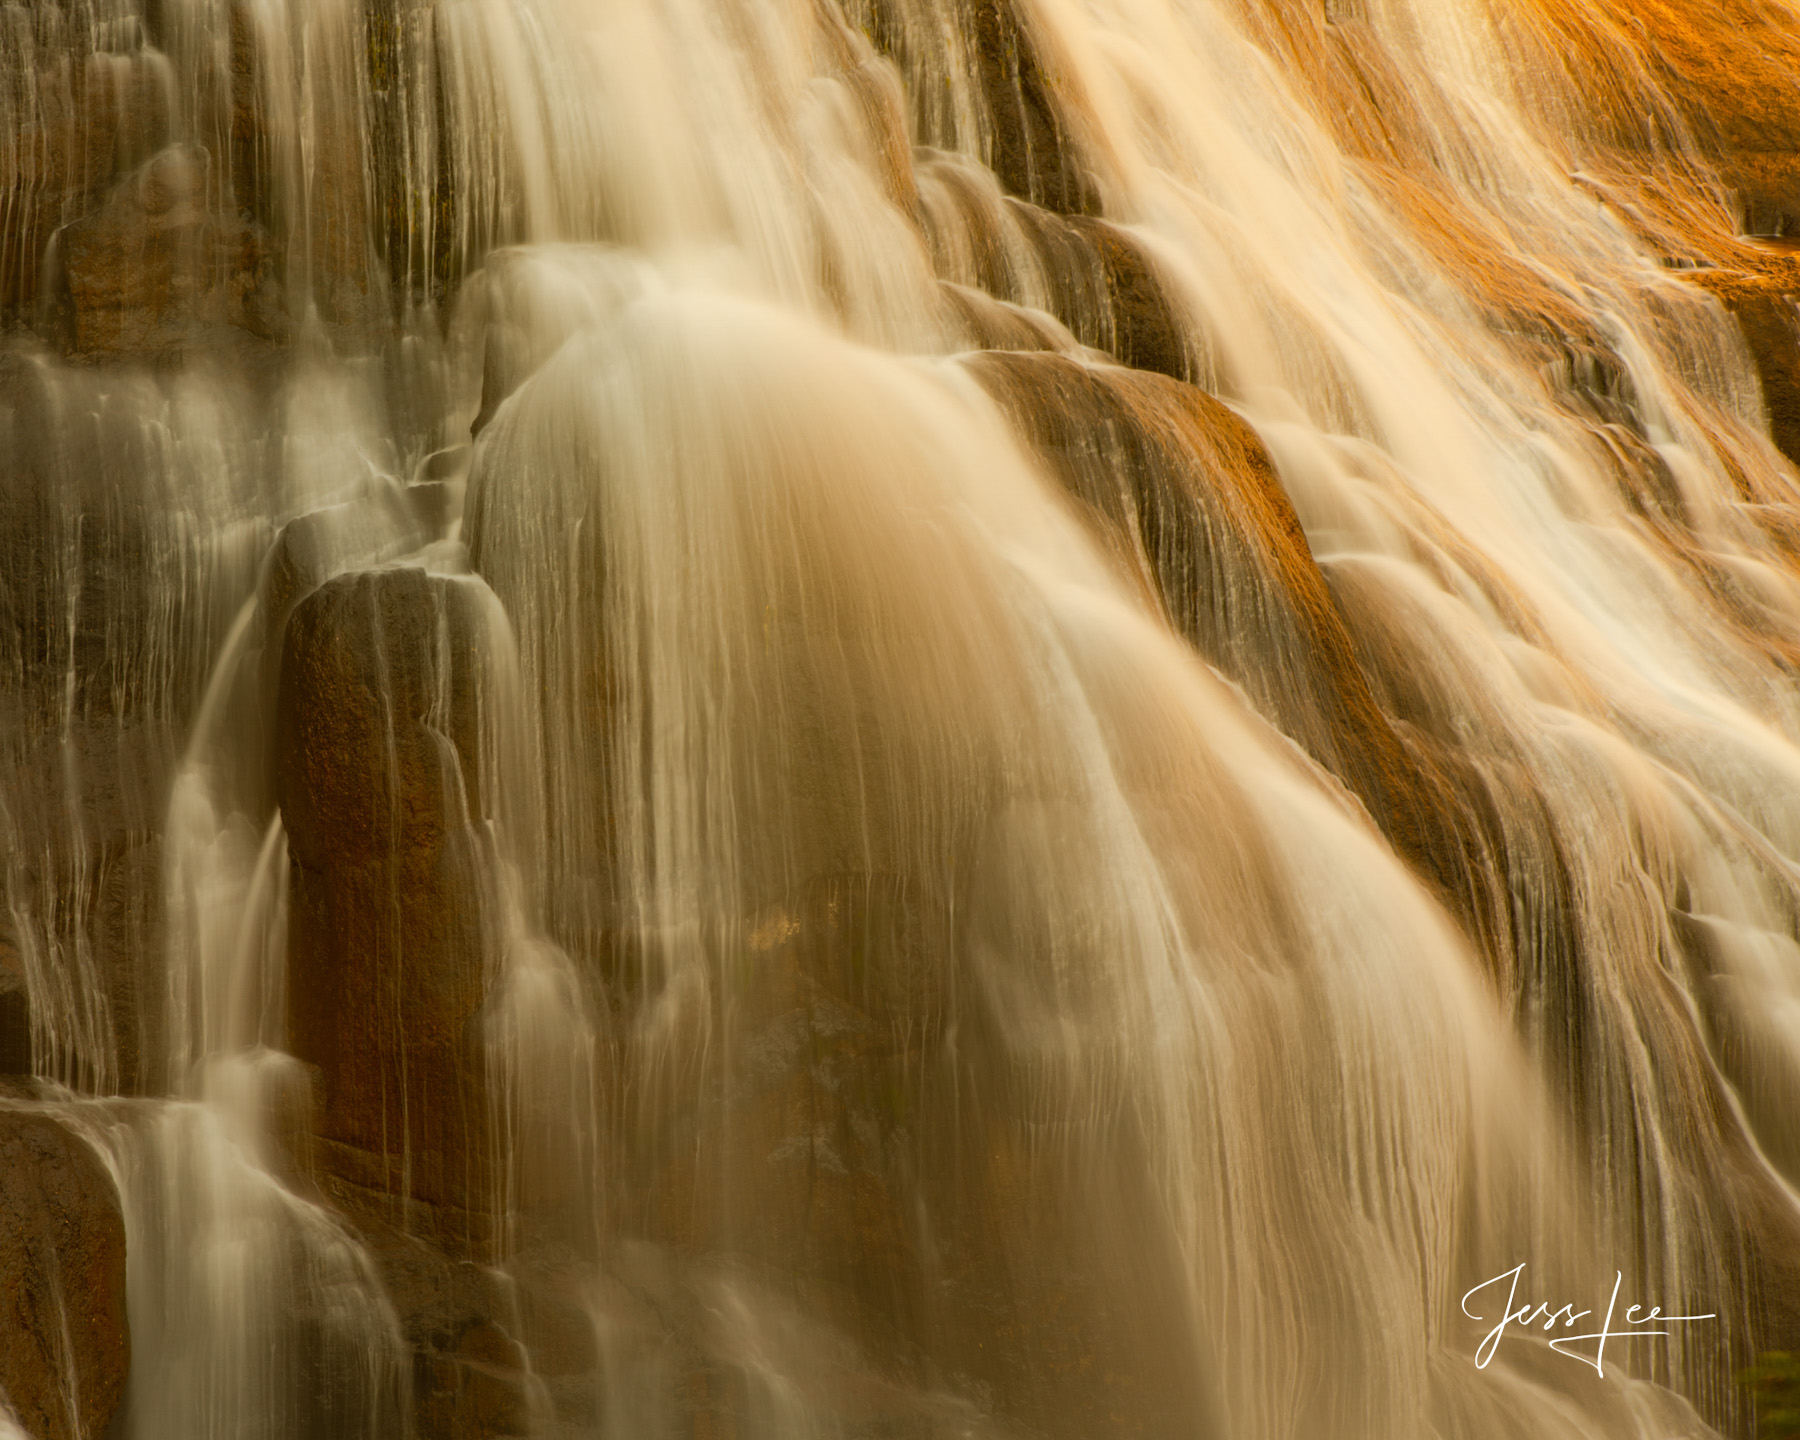 Limited Edition of 50 Exclusive high-resolution Museum Quality Fine Art Prints of this silky closeup of Gibbon Falls with the...